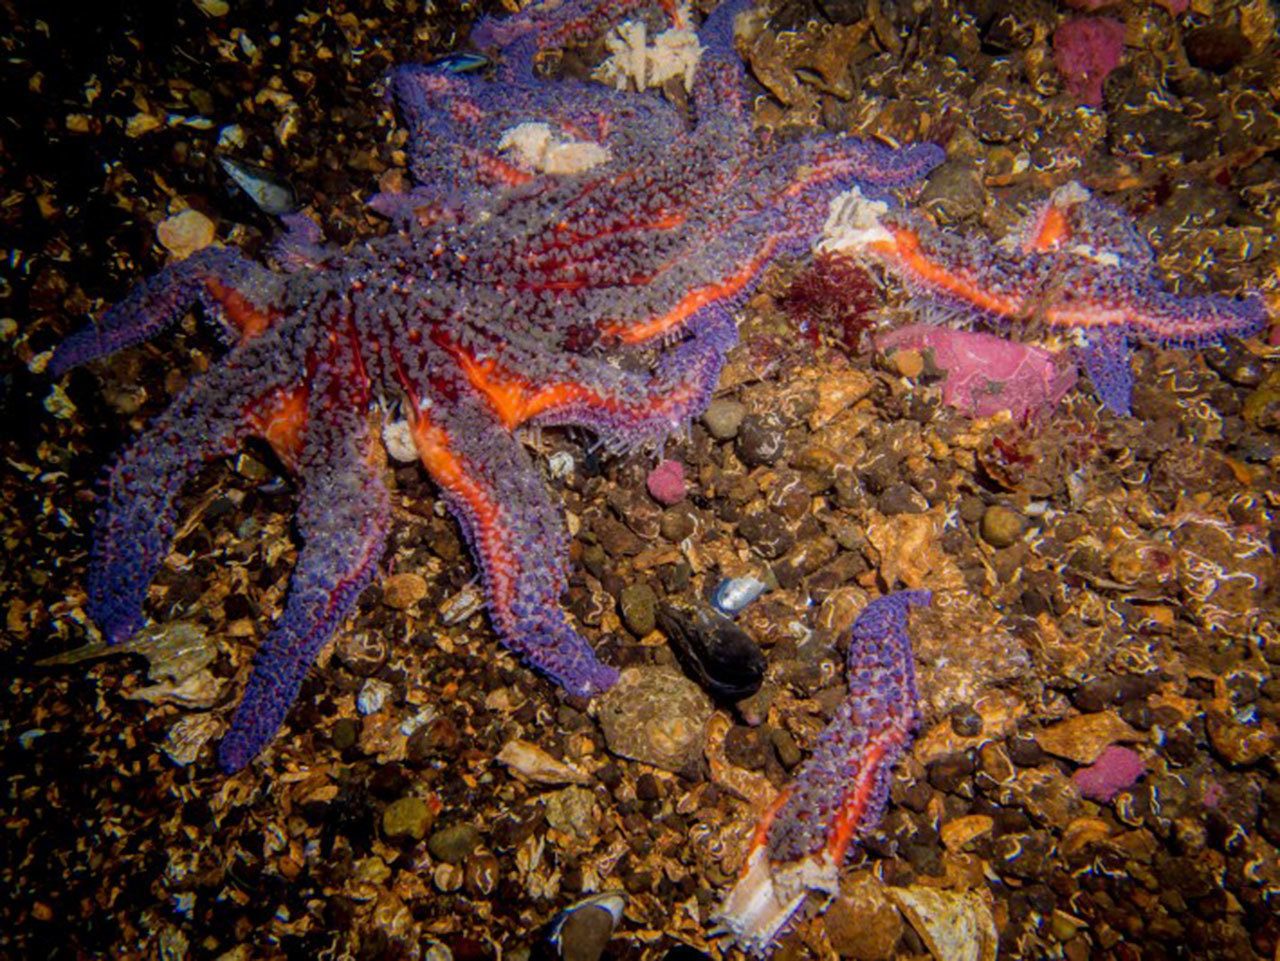 Contributed photo/Jenn Collins                                Sea Star Wasting Disease has taken its deadly toll on at least 20 species of echinoderms, but has affected sunflower sea stars the most, according to the SeaDoc Society.